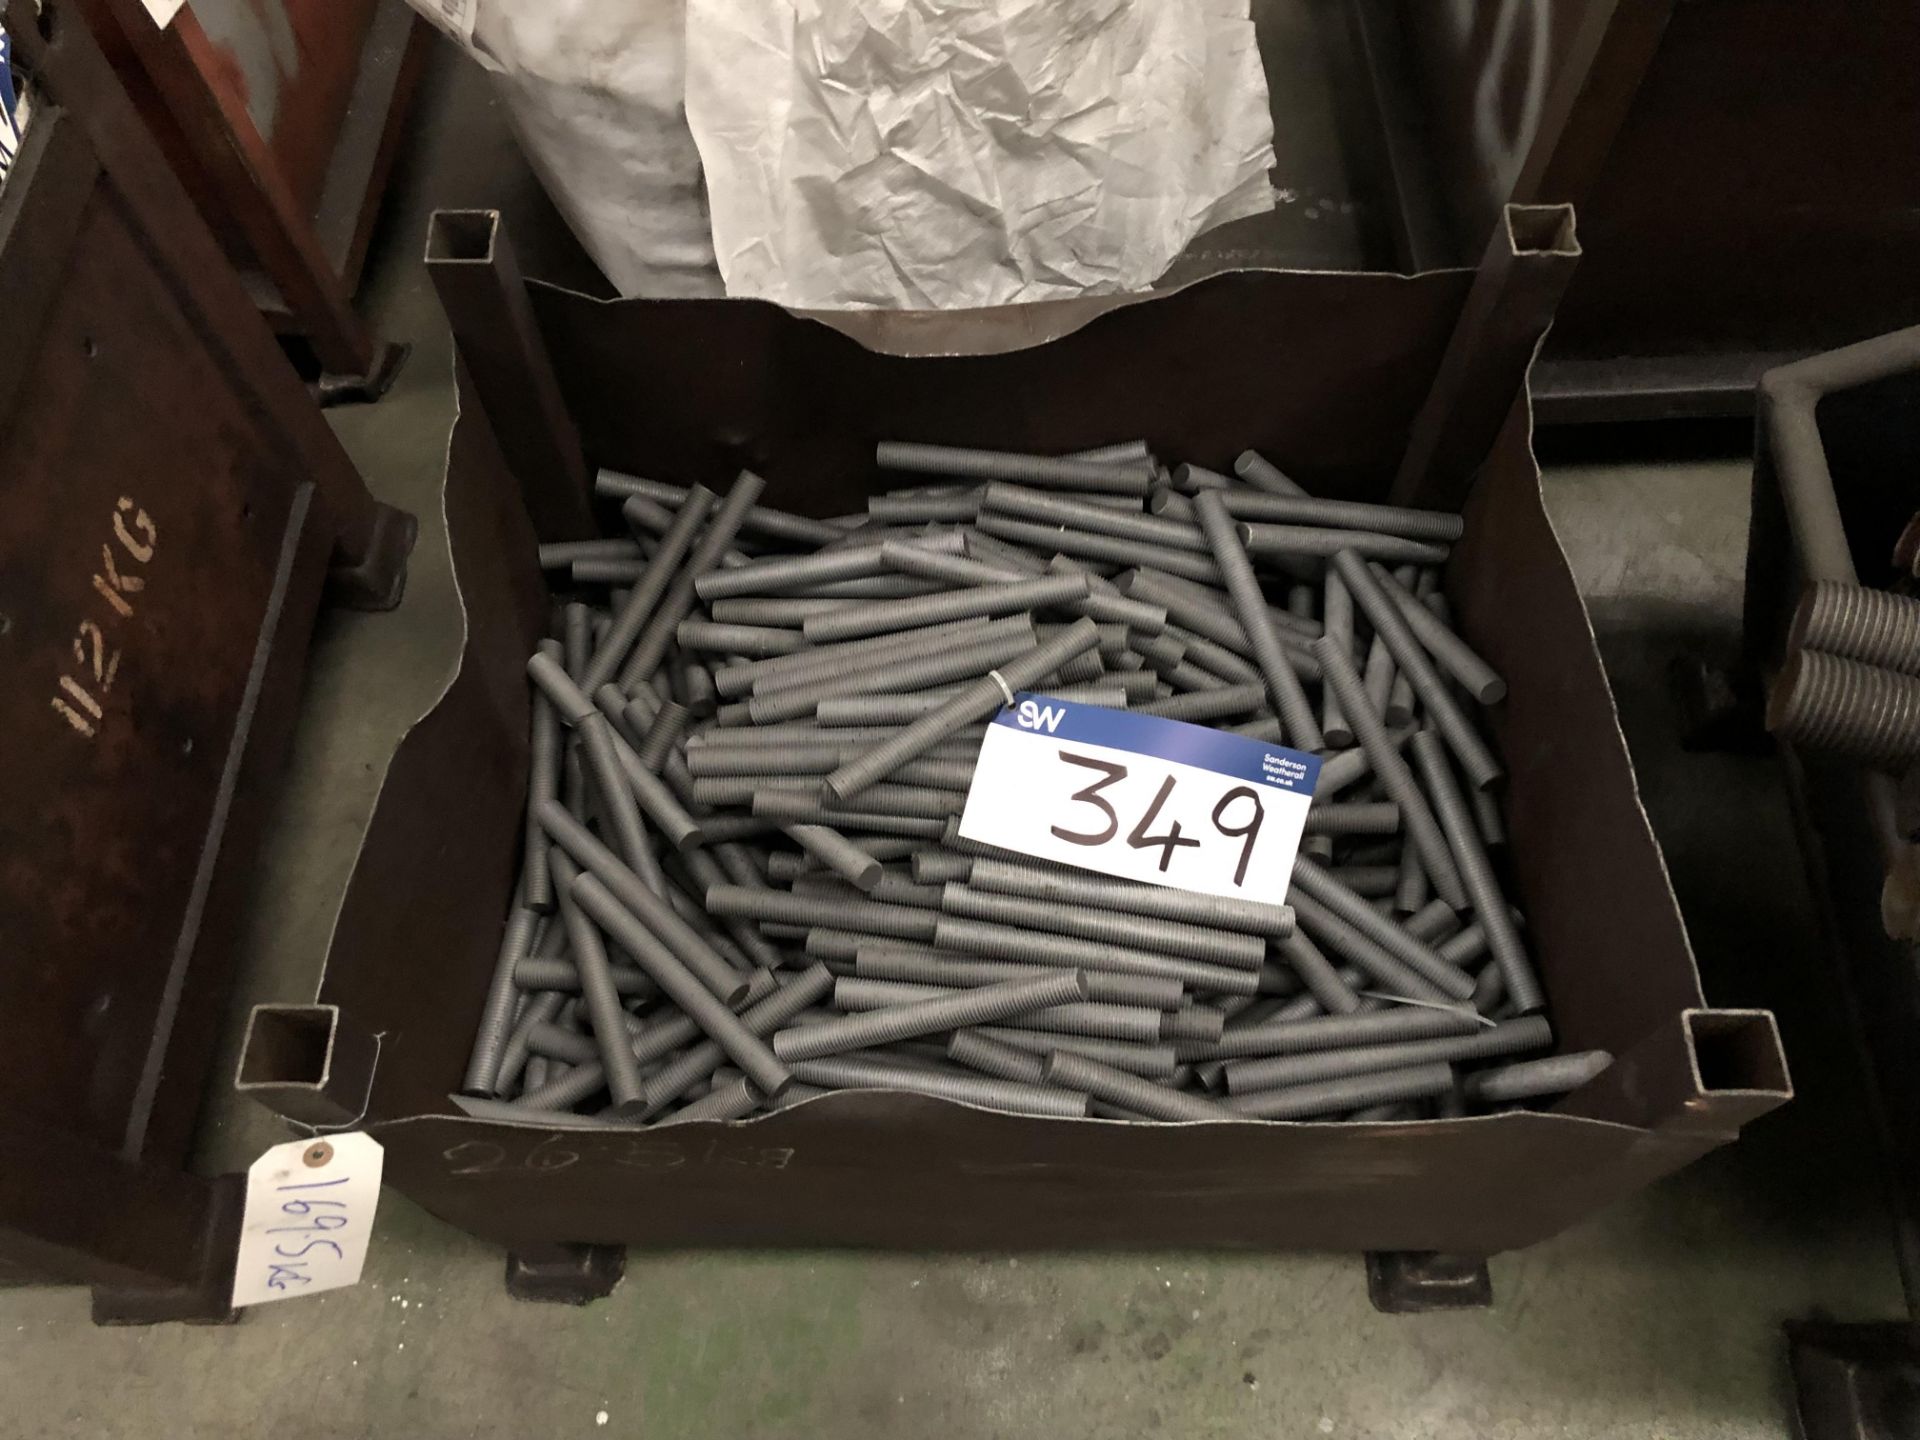 169.5kg of Threaded Bar - Image 2 of 3